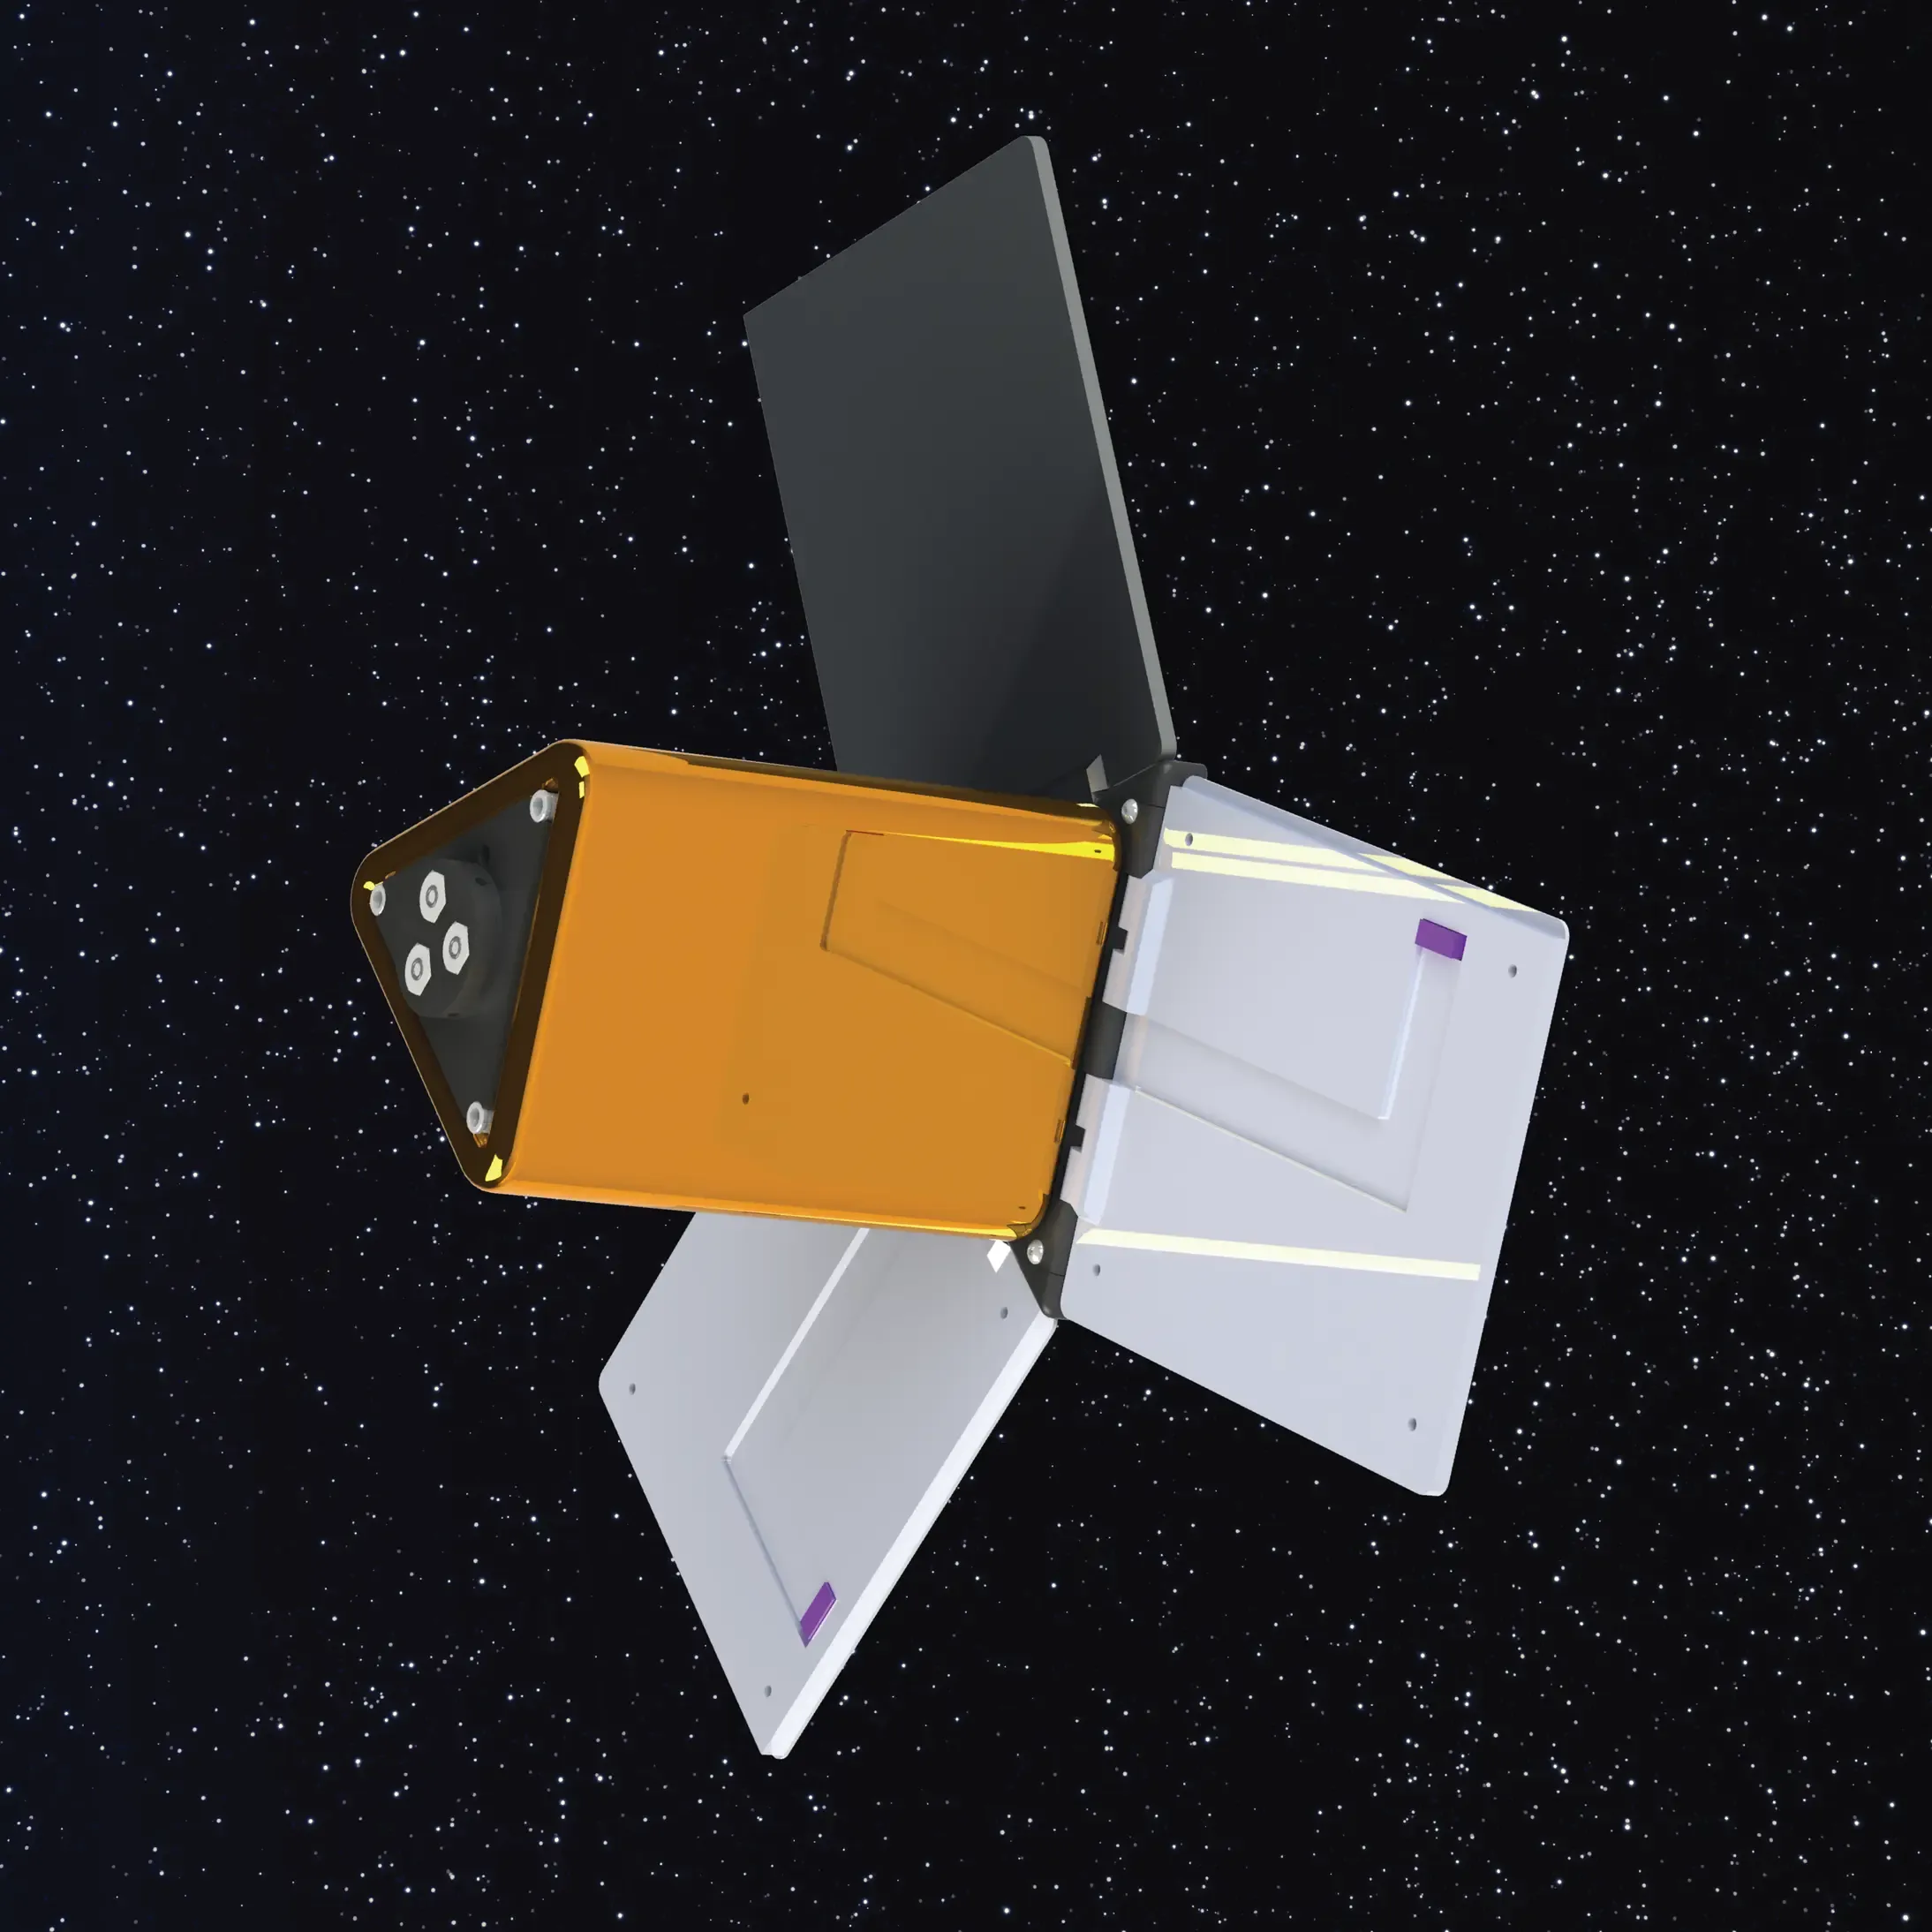 A 3D render of a small satellite in space.